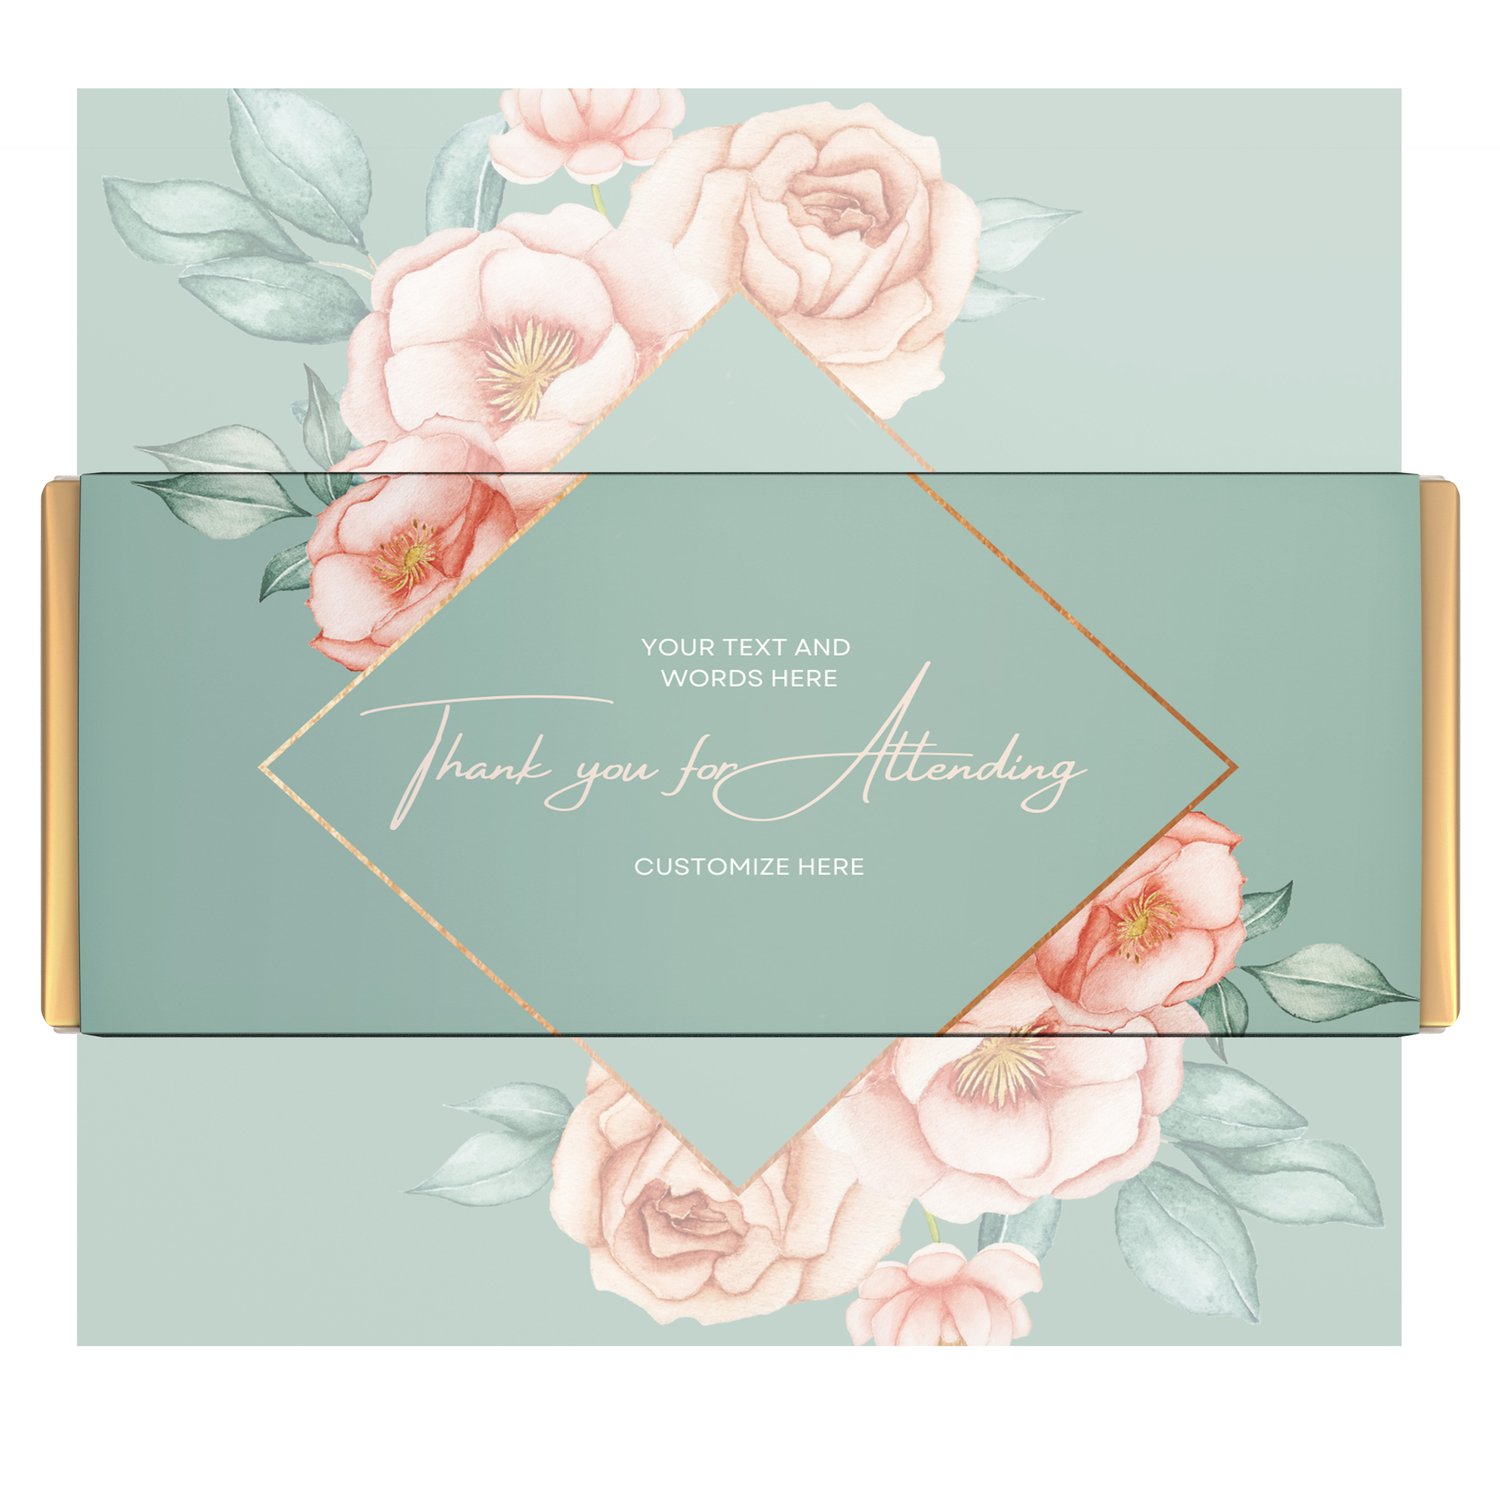 Teal and Gold Floral Design for 5x5 inch Chocolate Bar Labels